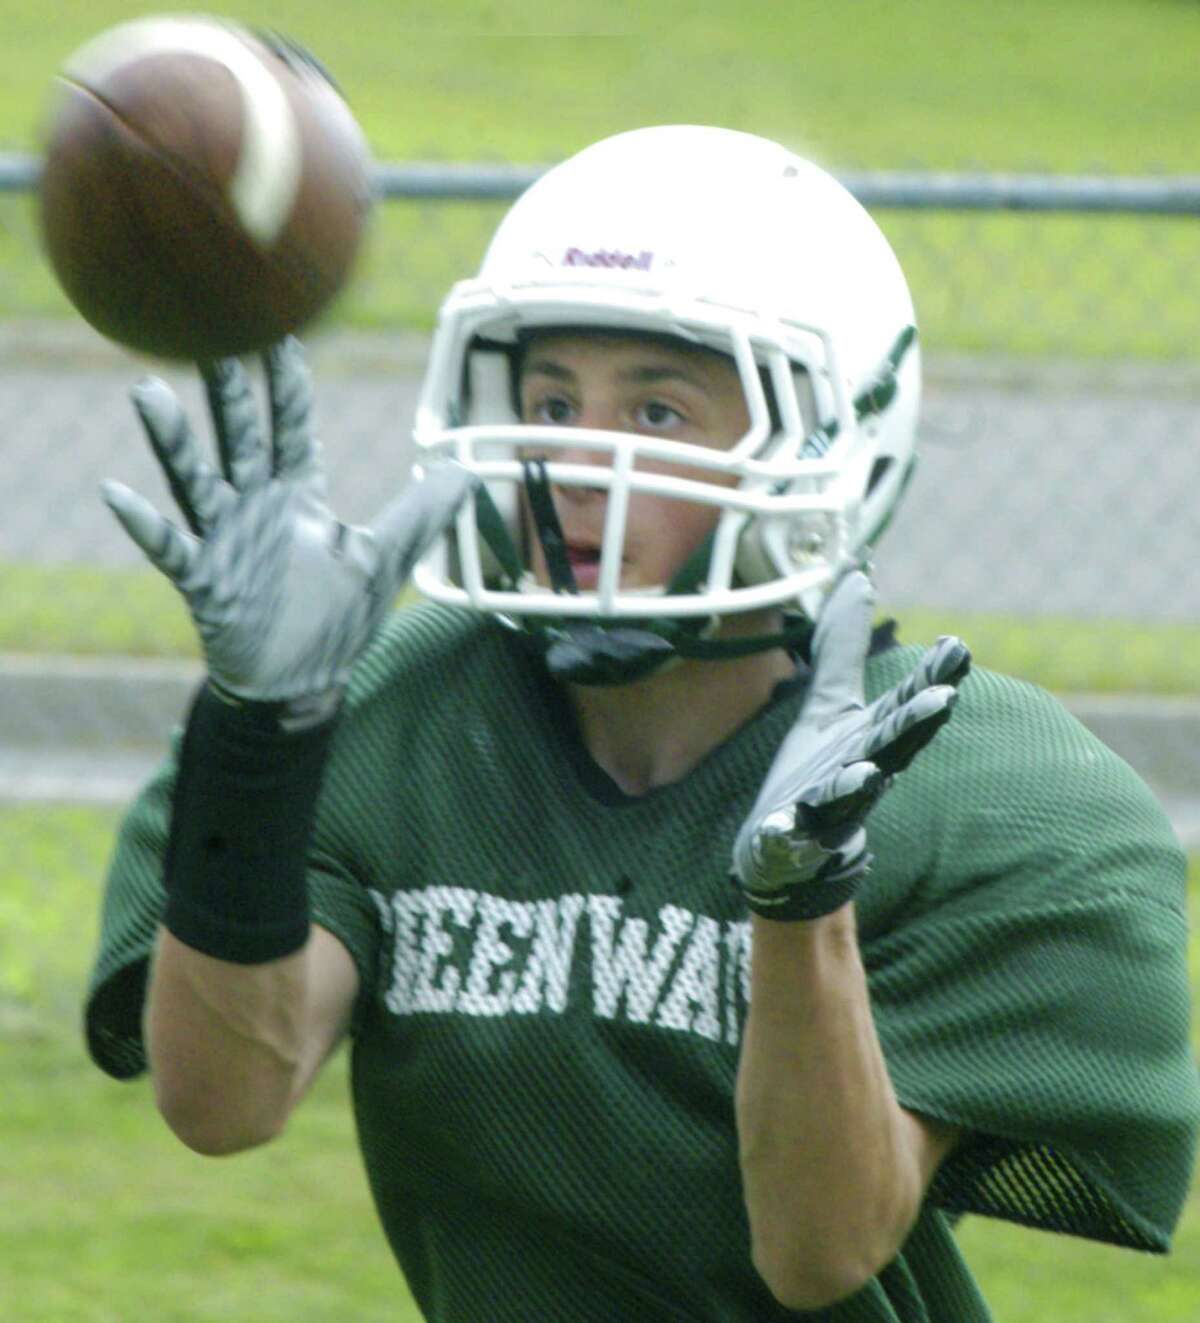 The Green Wave's Michael Carrozza focuses on the catch during pre-season drills for New Milford High School football, September 2013